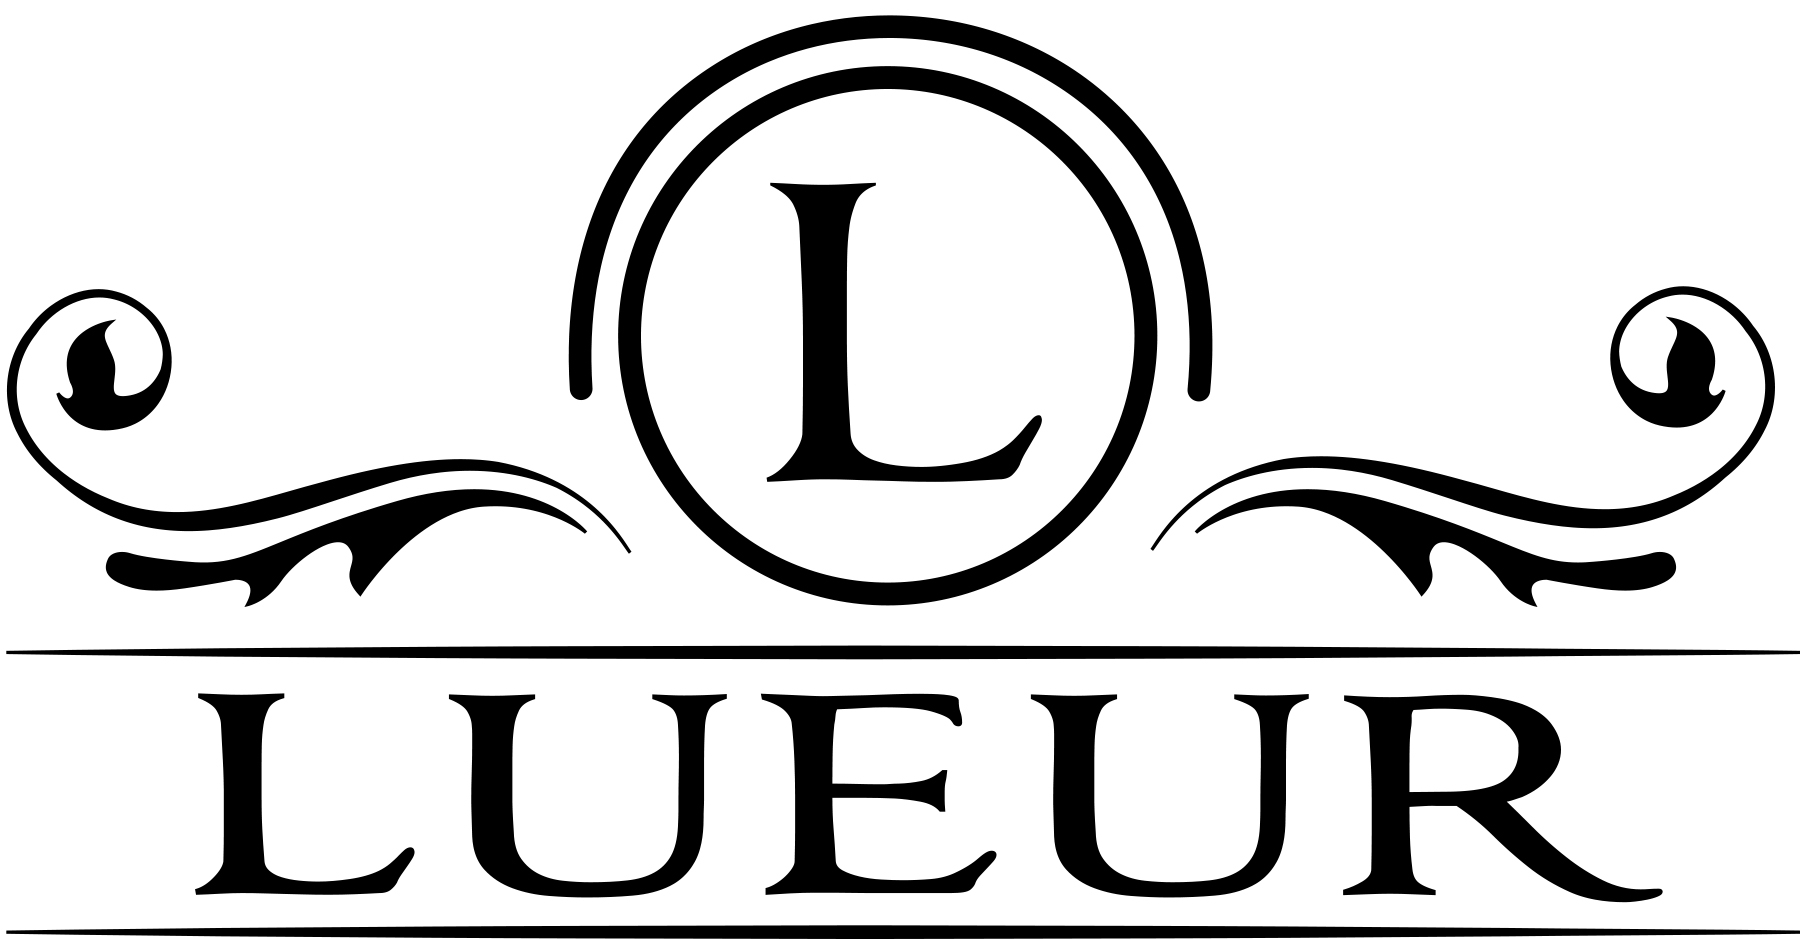 LUEUR to be Held at Javits Convention Center, October 23-25, 2015